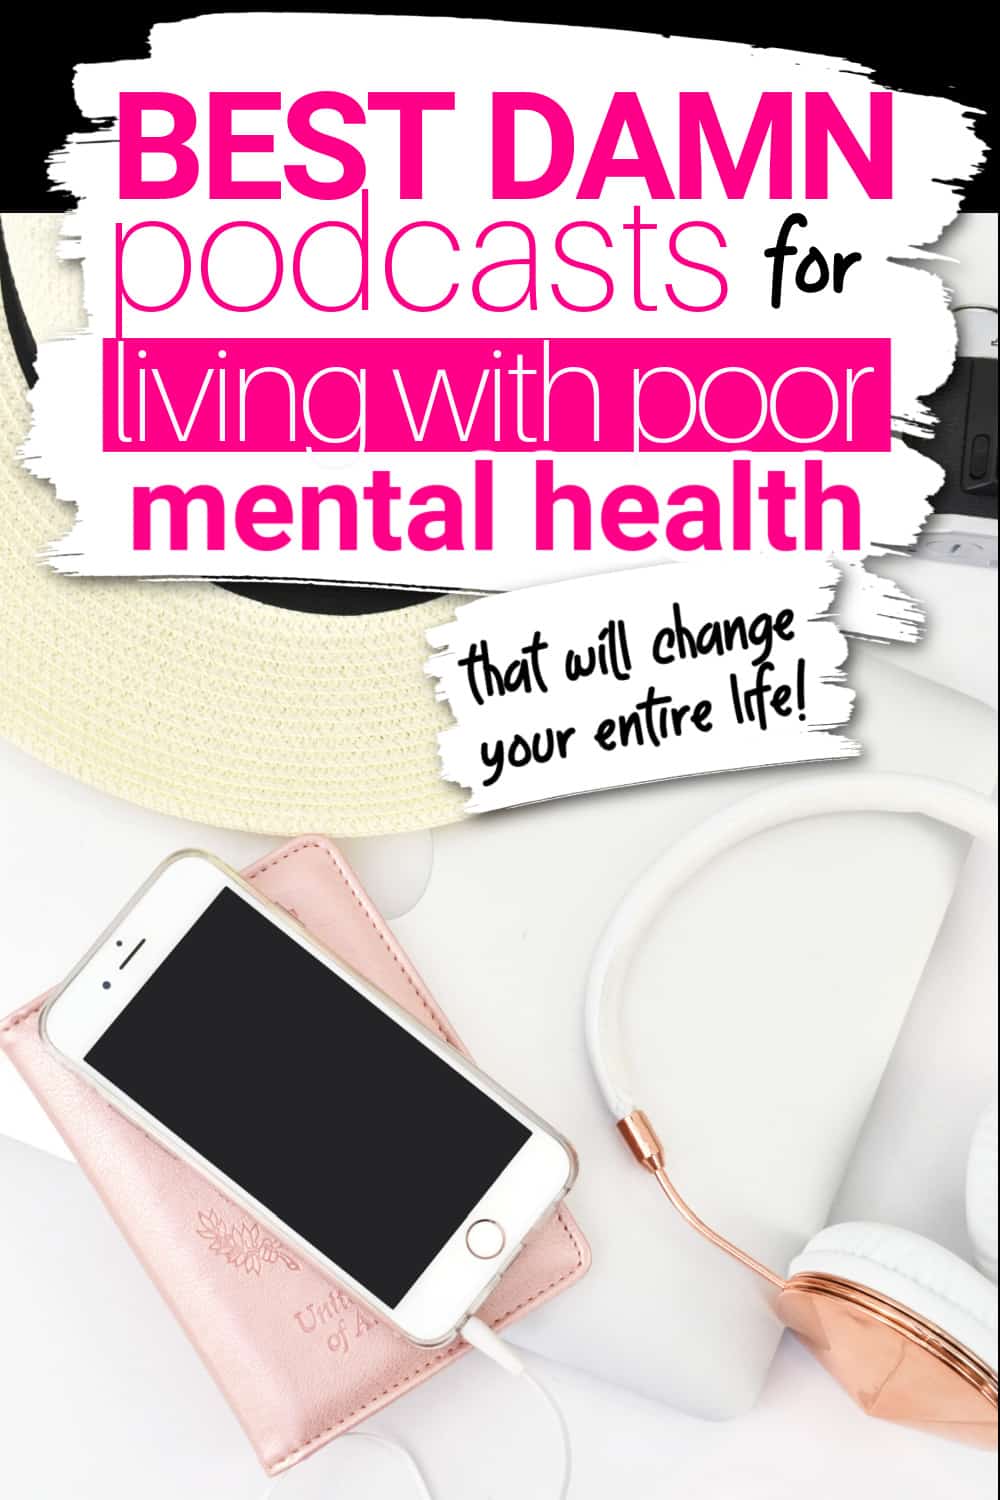 On a Macbook, there is an iPhone charging on top of a pink wallet. There are rose gold and white headphones next to it. Text overlay says, best damn podcasts for living with poor mental health - that will change your entire life!